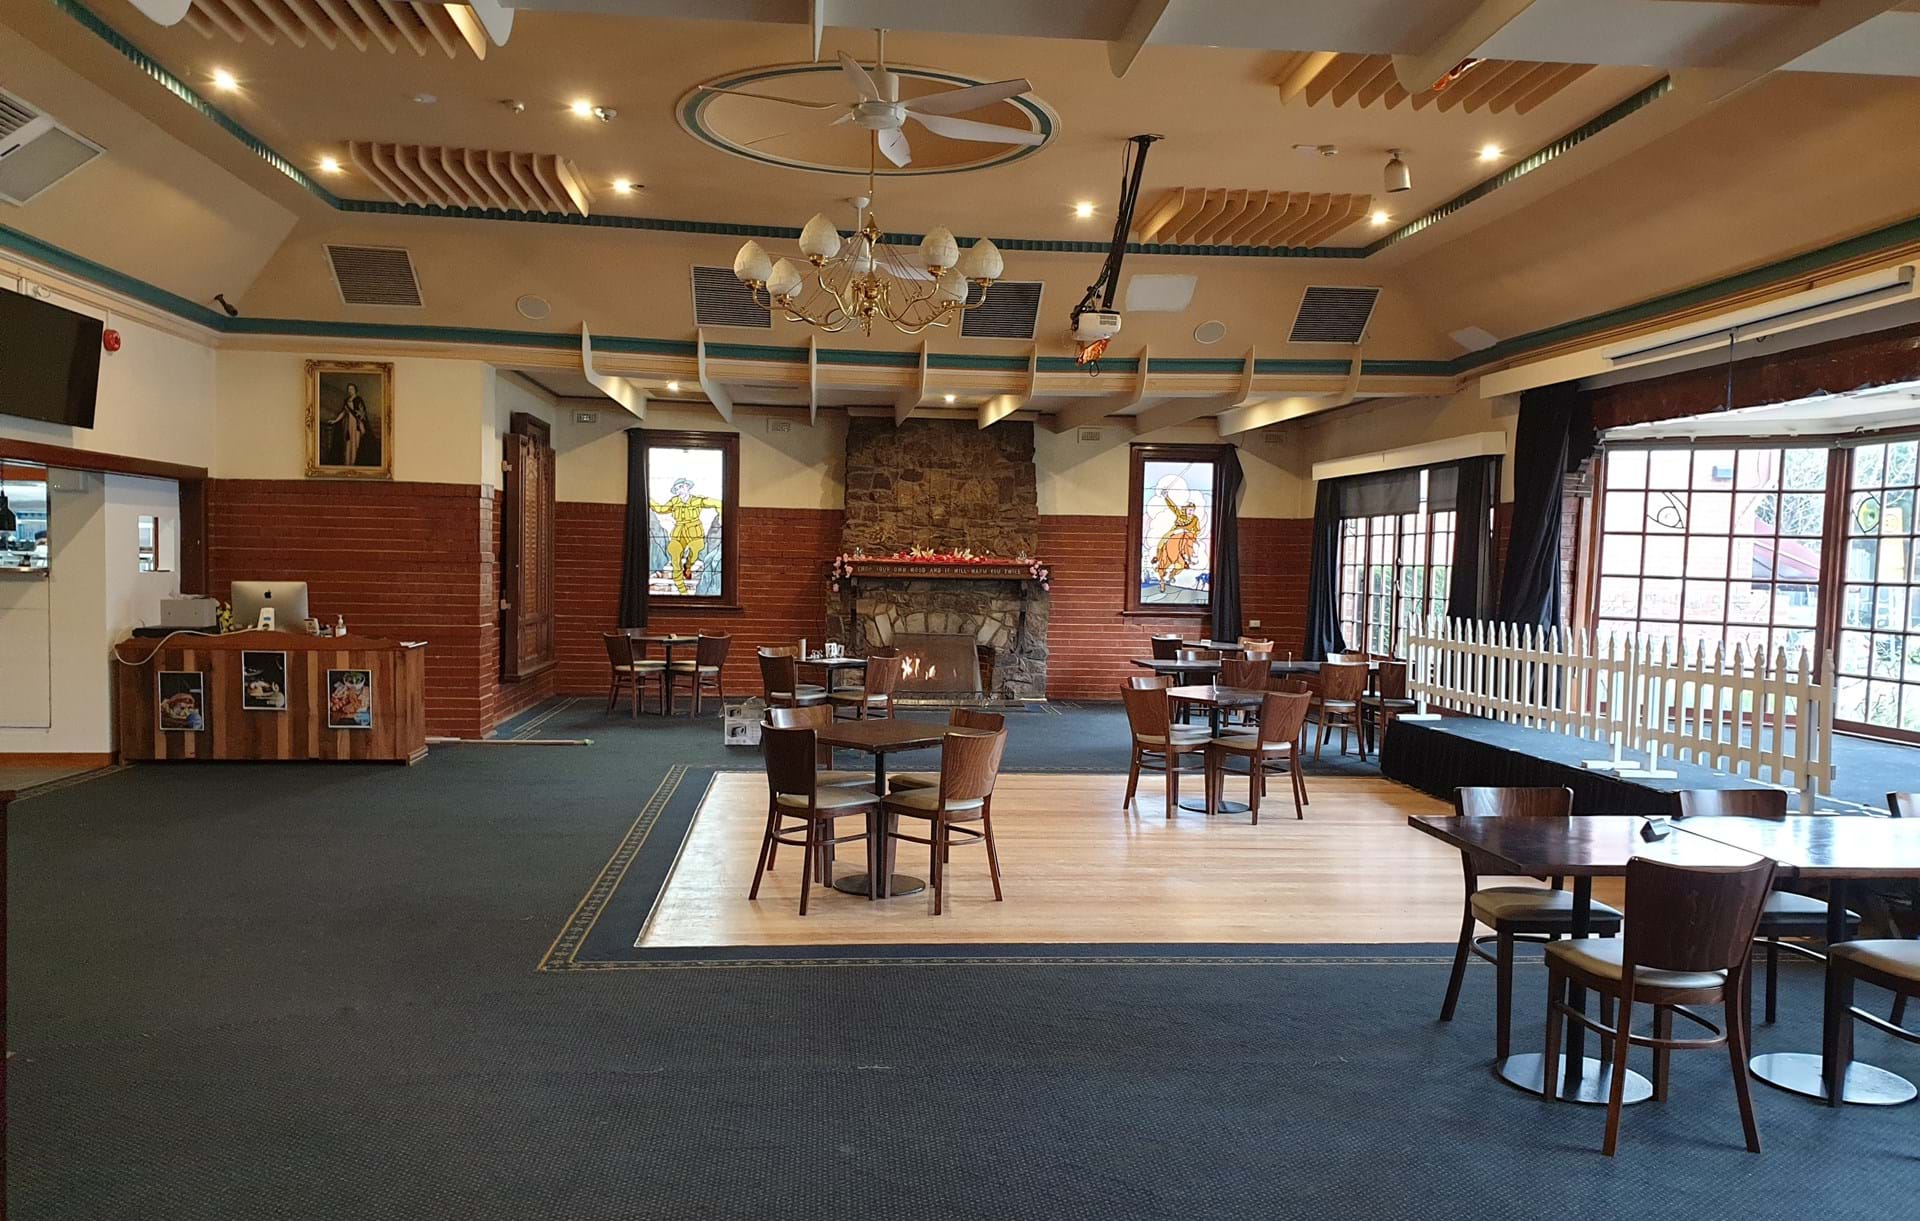 Caulfield RSL|Dining|Function Catering|Fireplace|Elsternwick